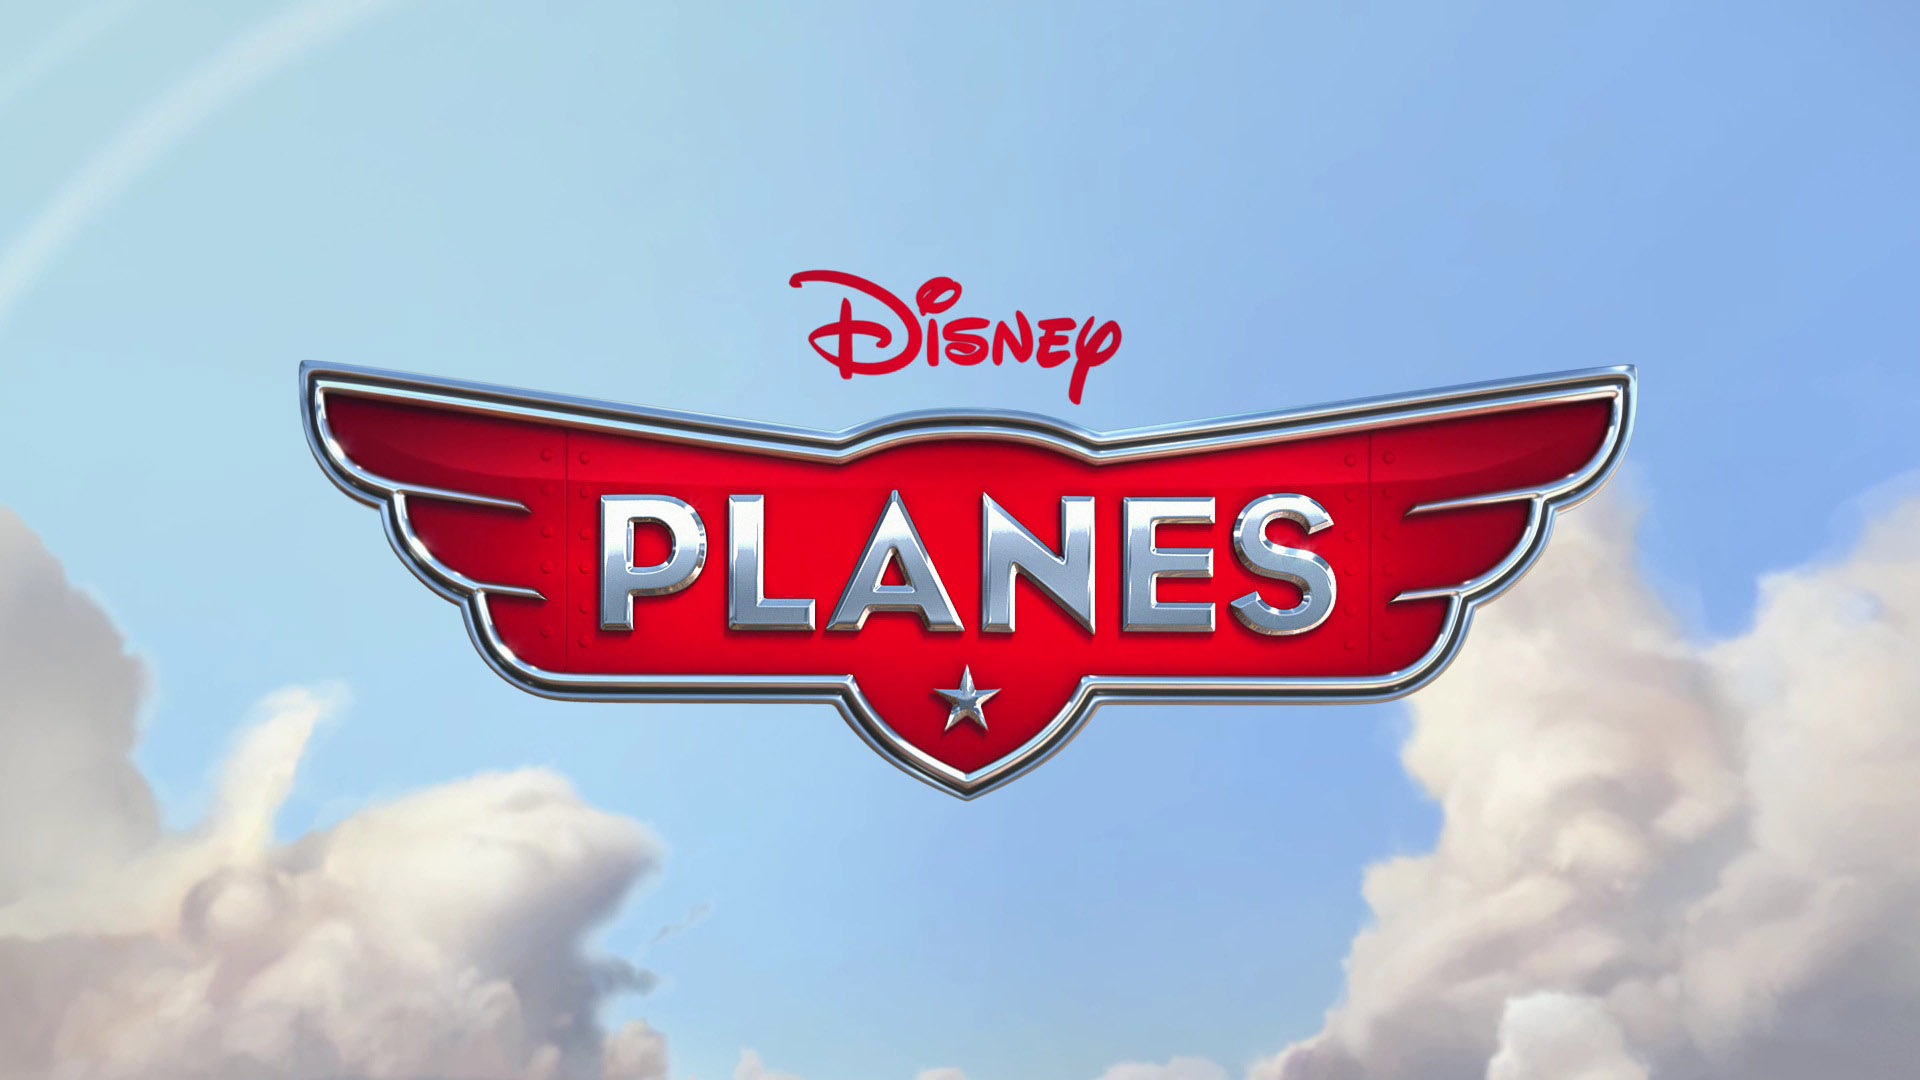 Planes 2013 HD wallpapers #11 - 1920x1080